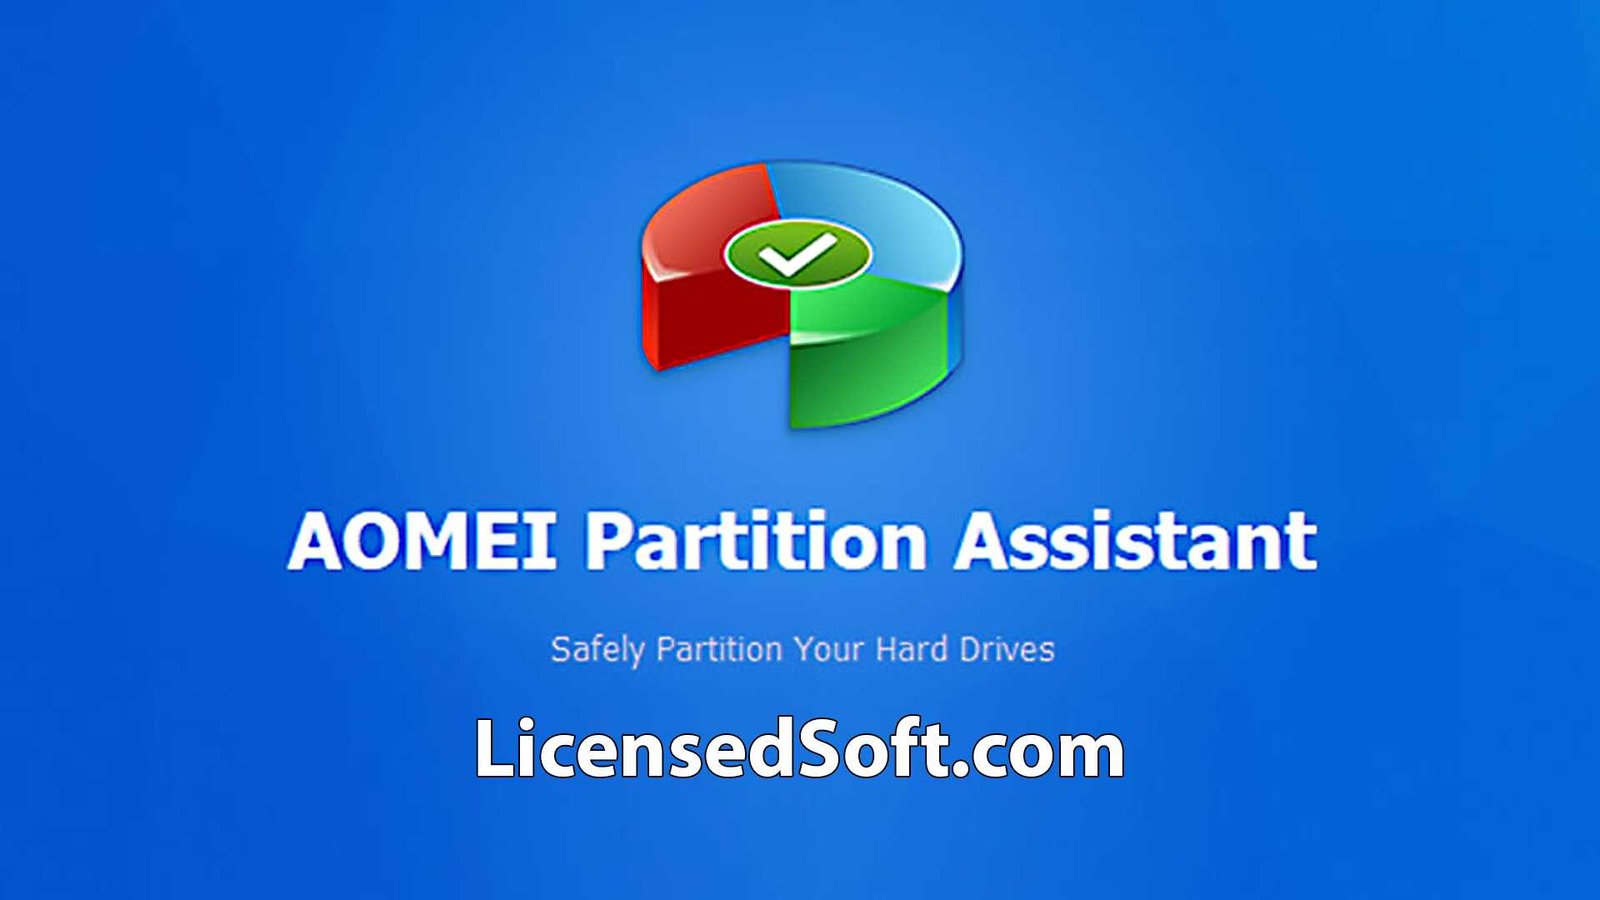 AOMEI Partition Assistant 10.2 Cover Image By LicensedSoft